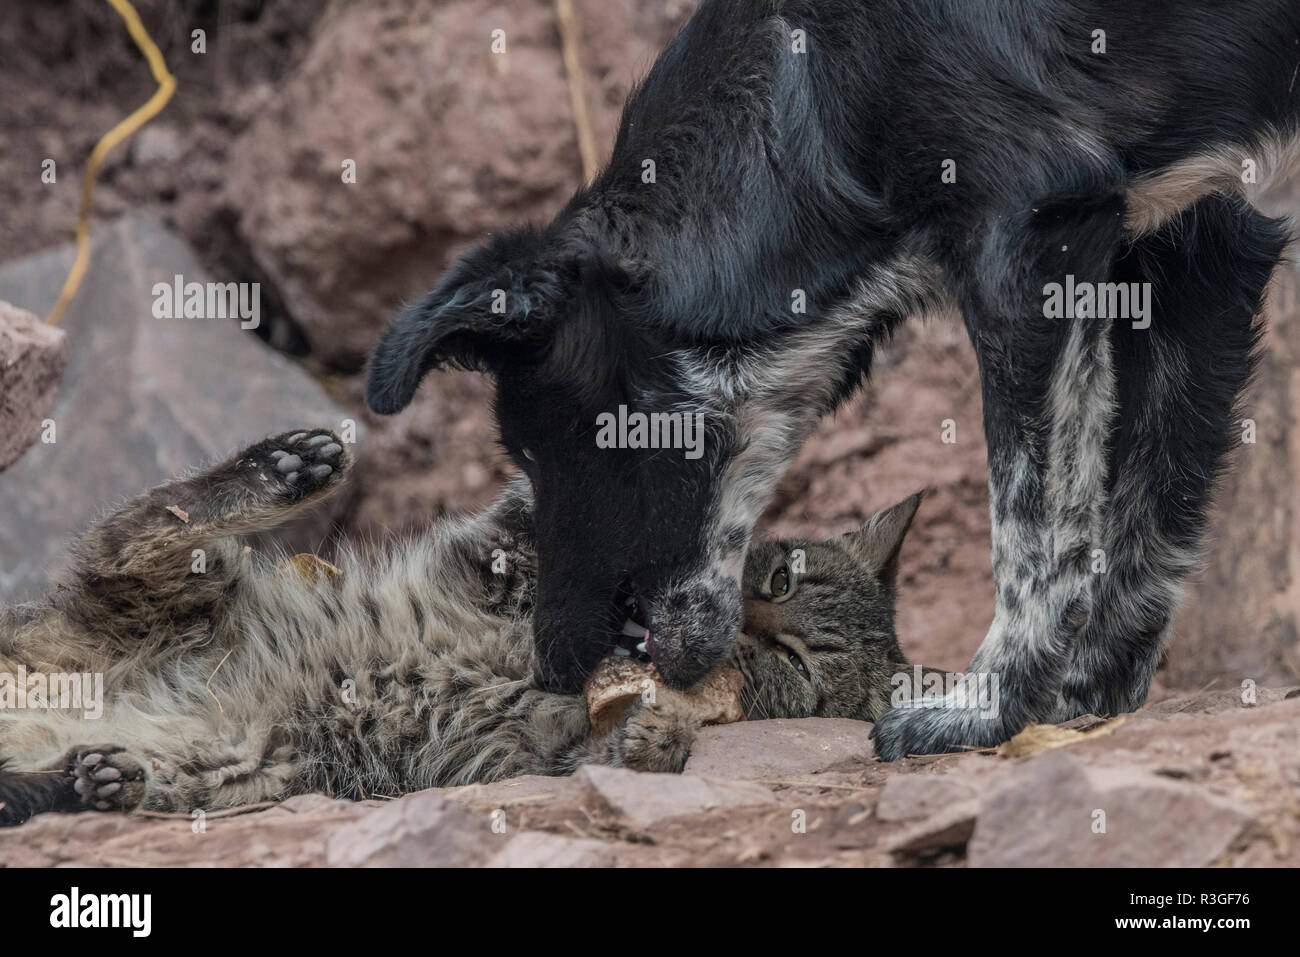 A cat nuzzles up to an unlikely friend, a dog, on the streets outside of Cusco, Peru. Stock Photo